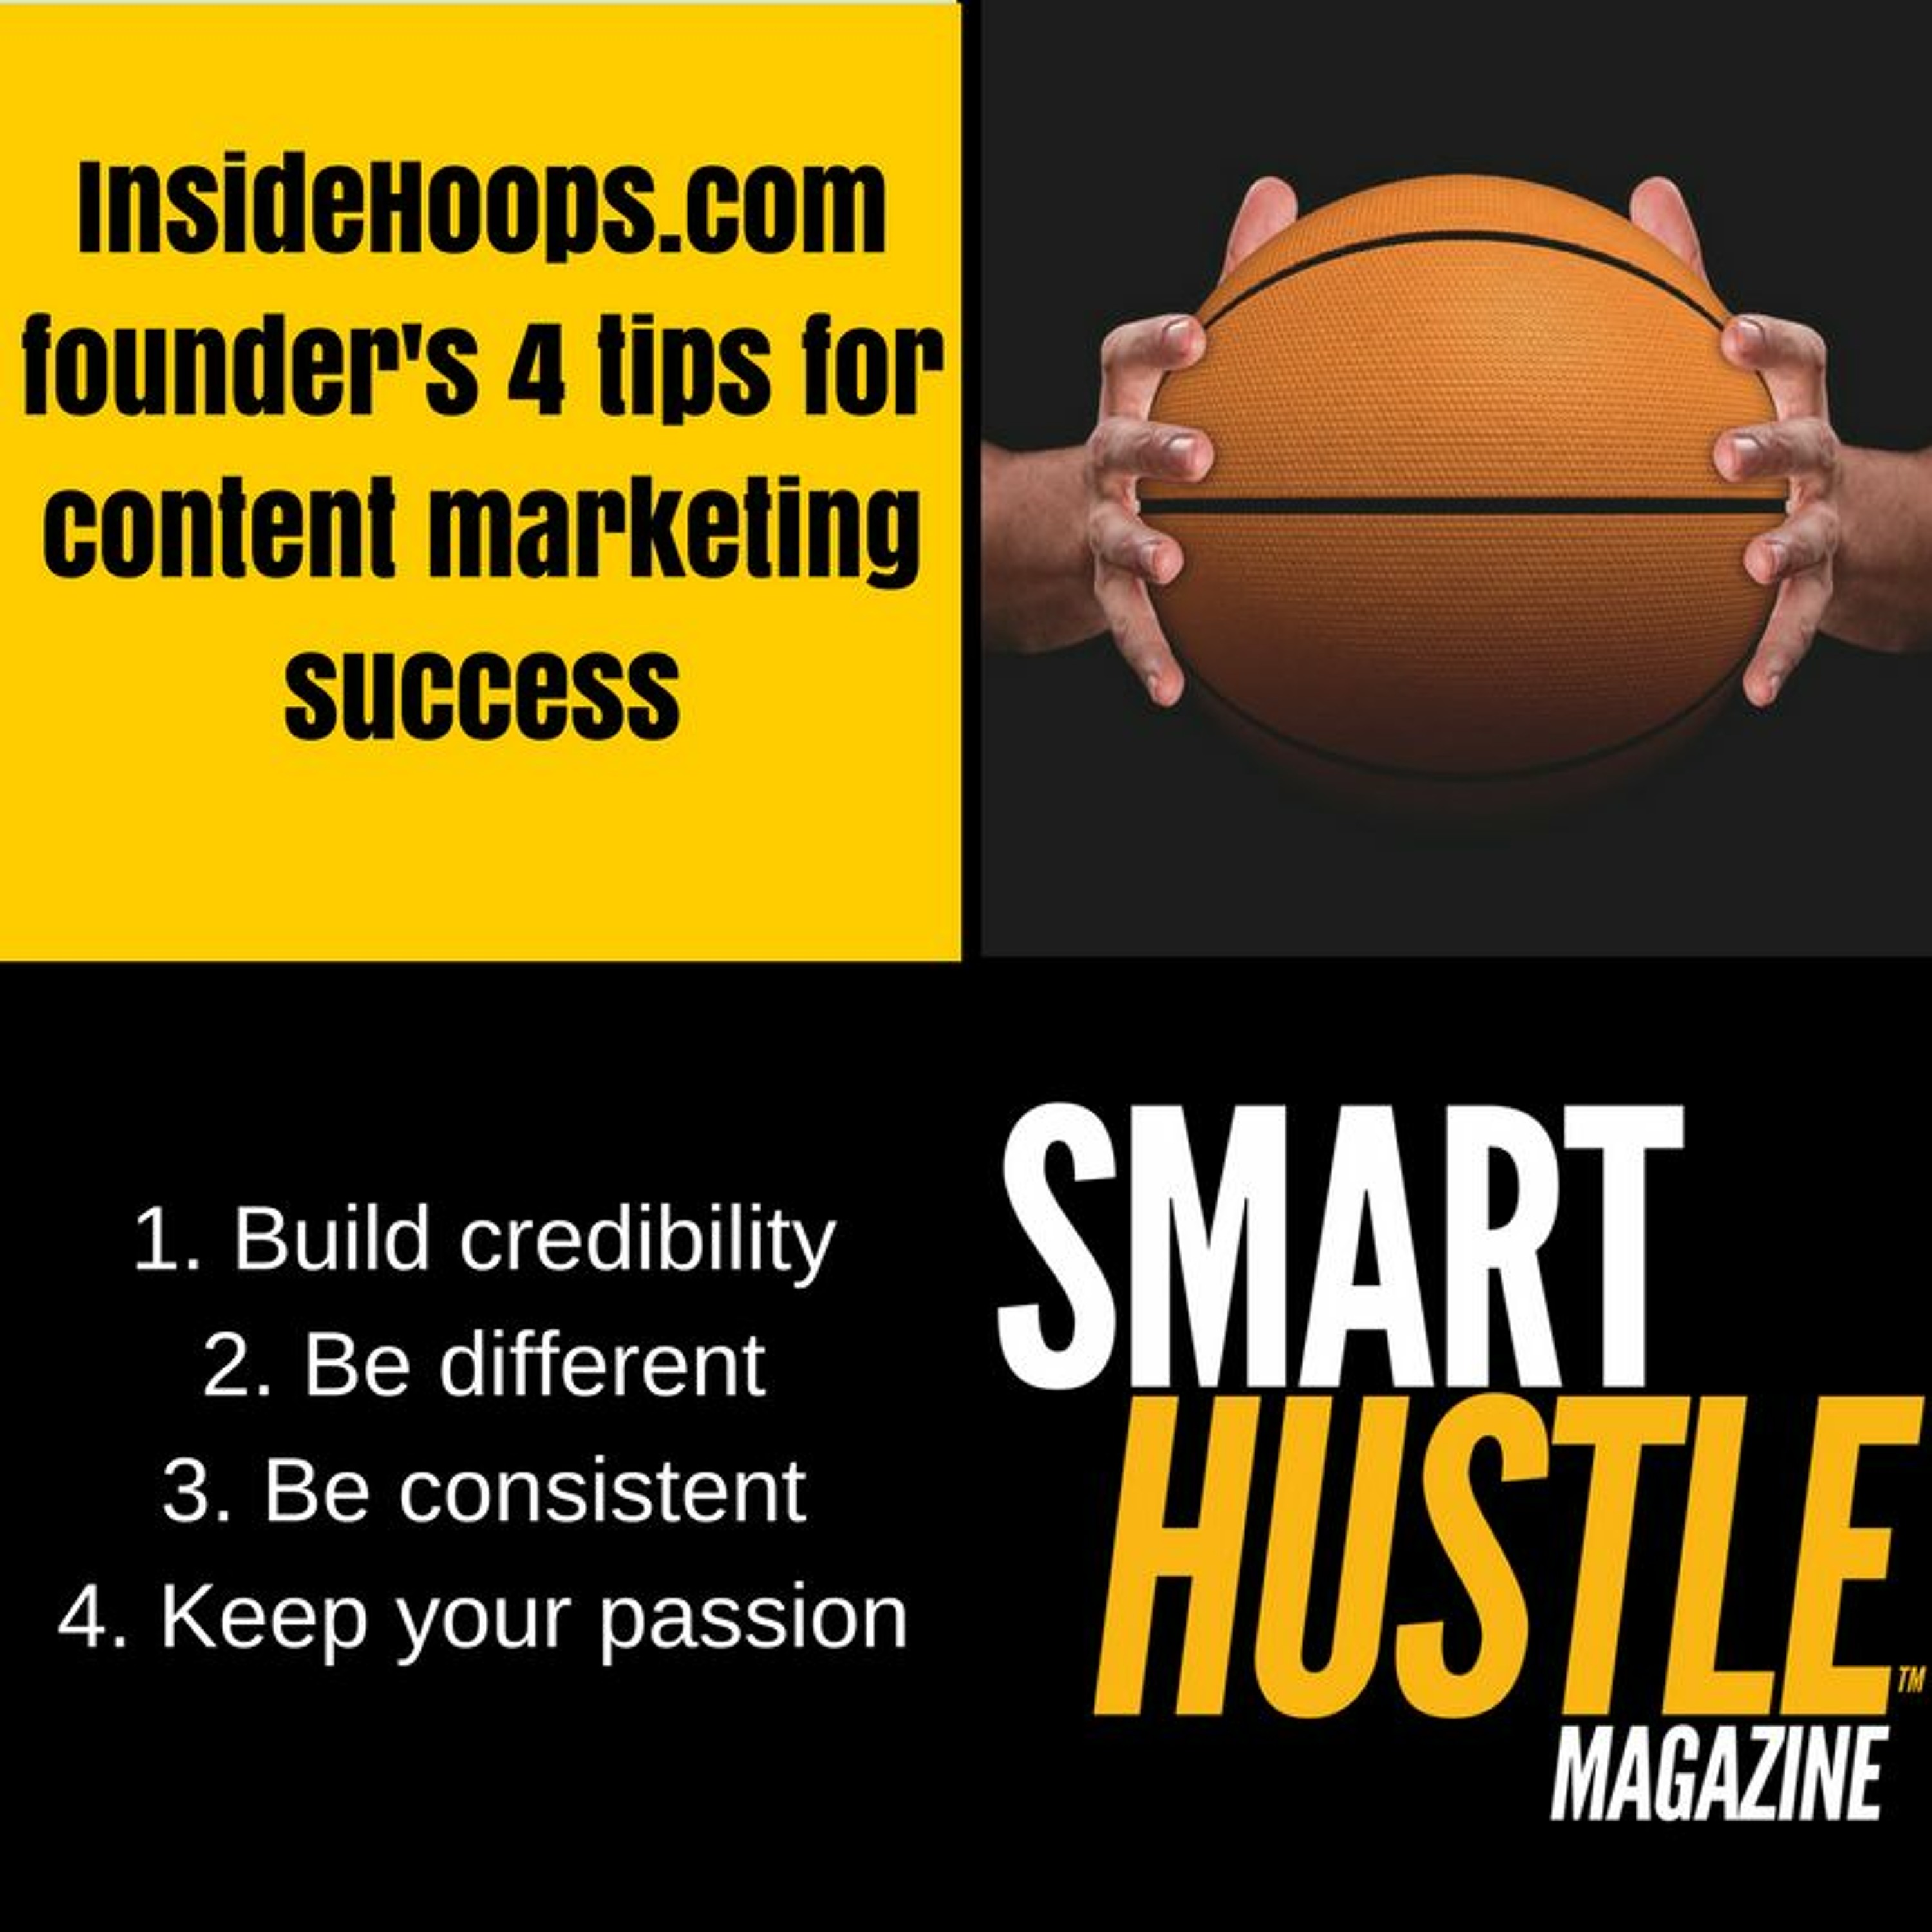 Jeff Lenchiner of Inside Hoops - 4 Tips So Content Marketing Success